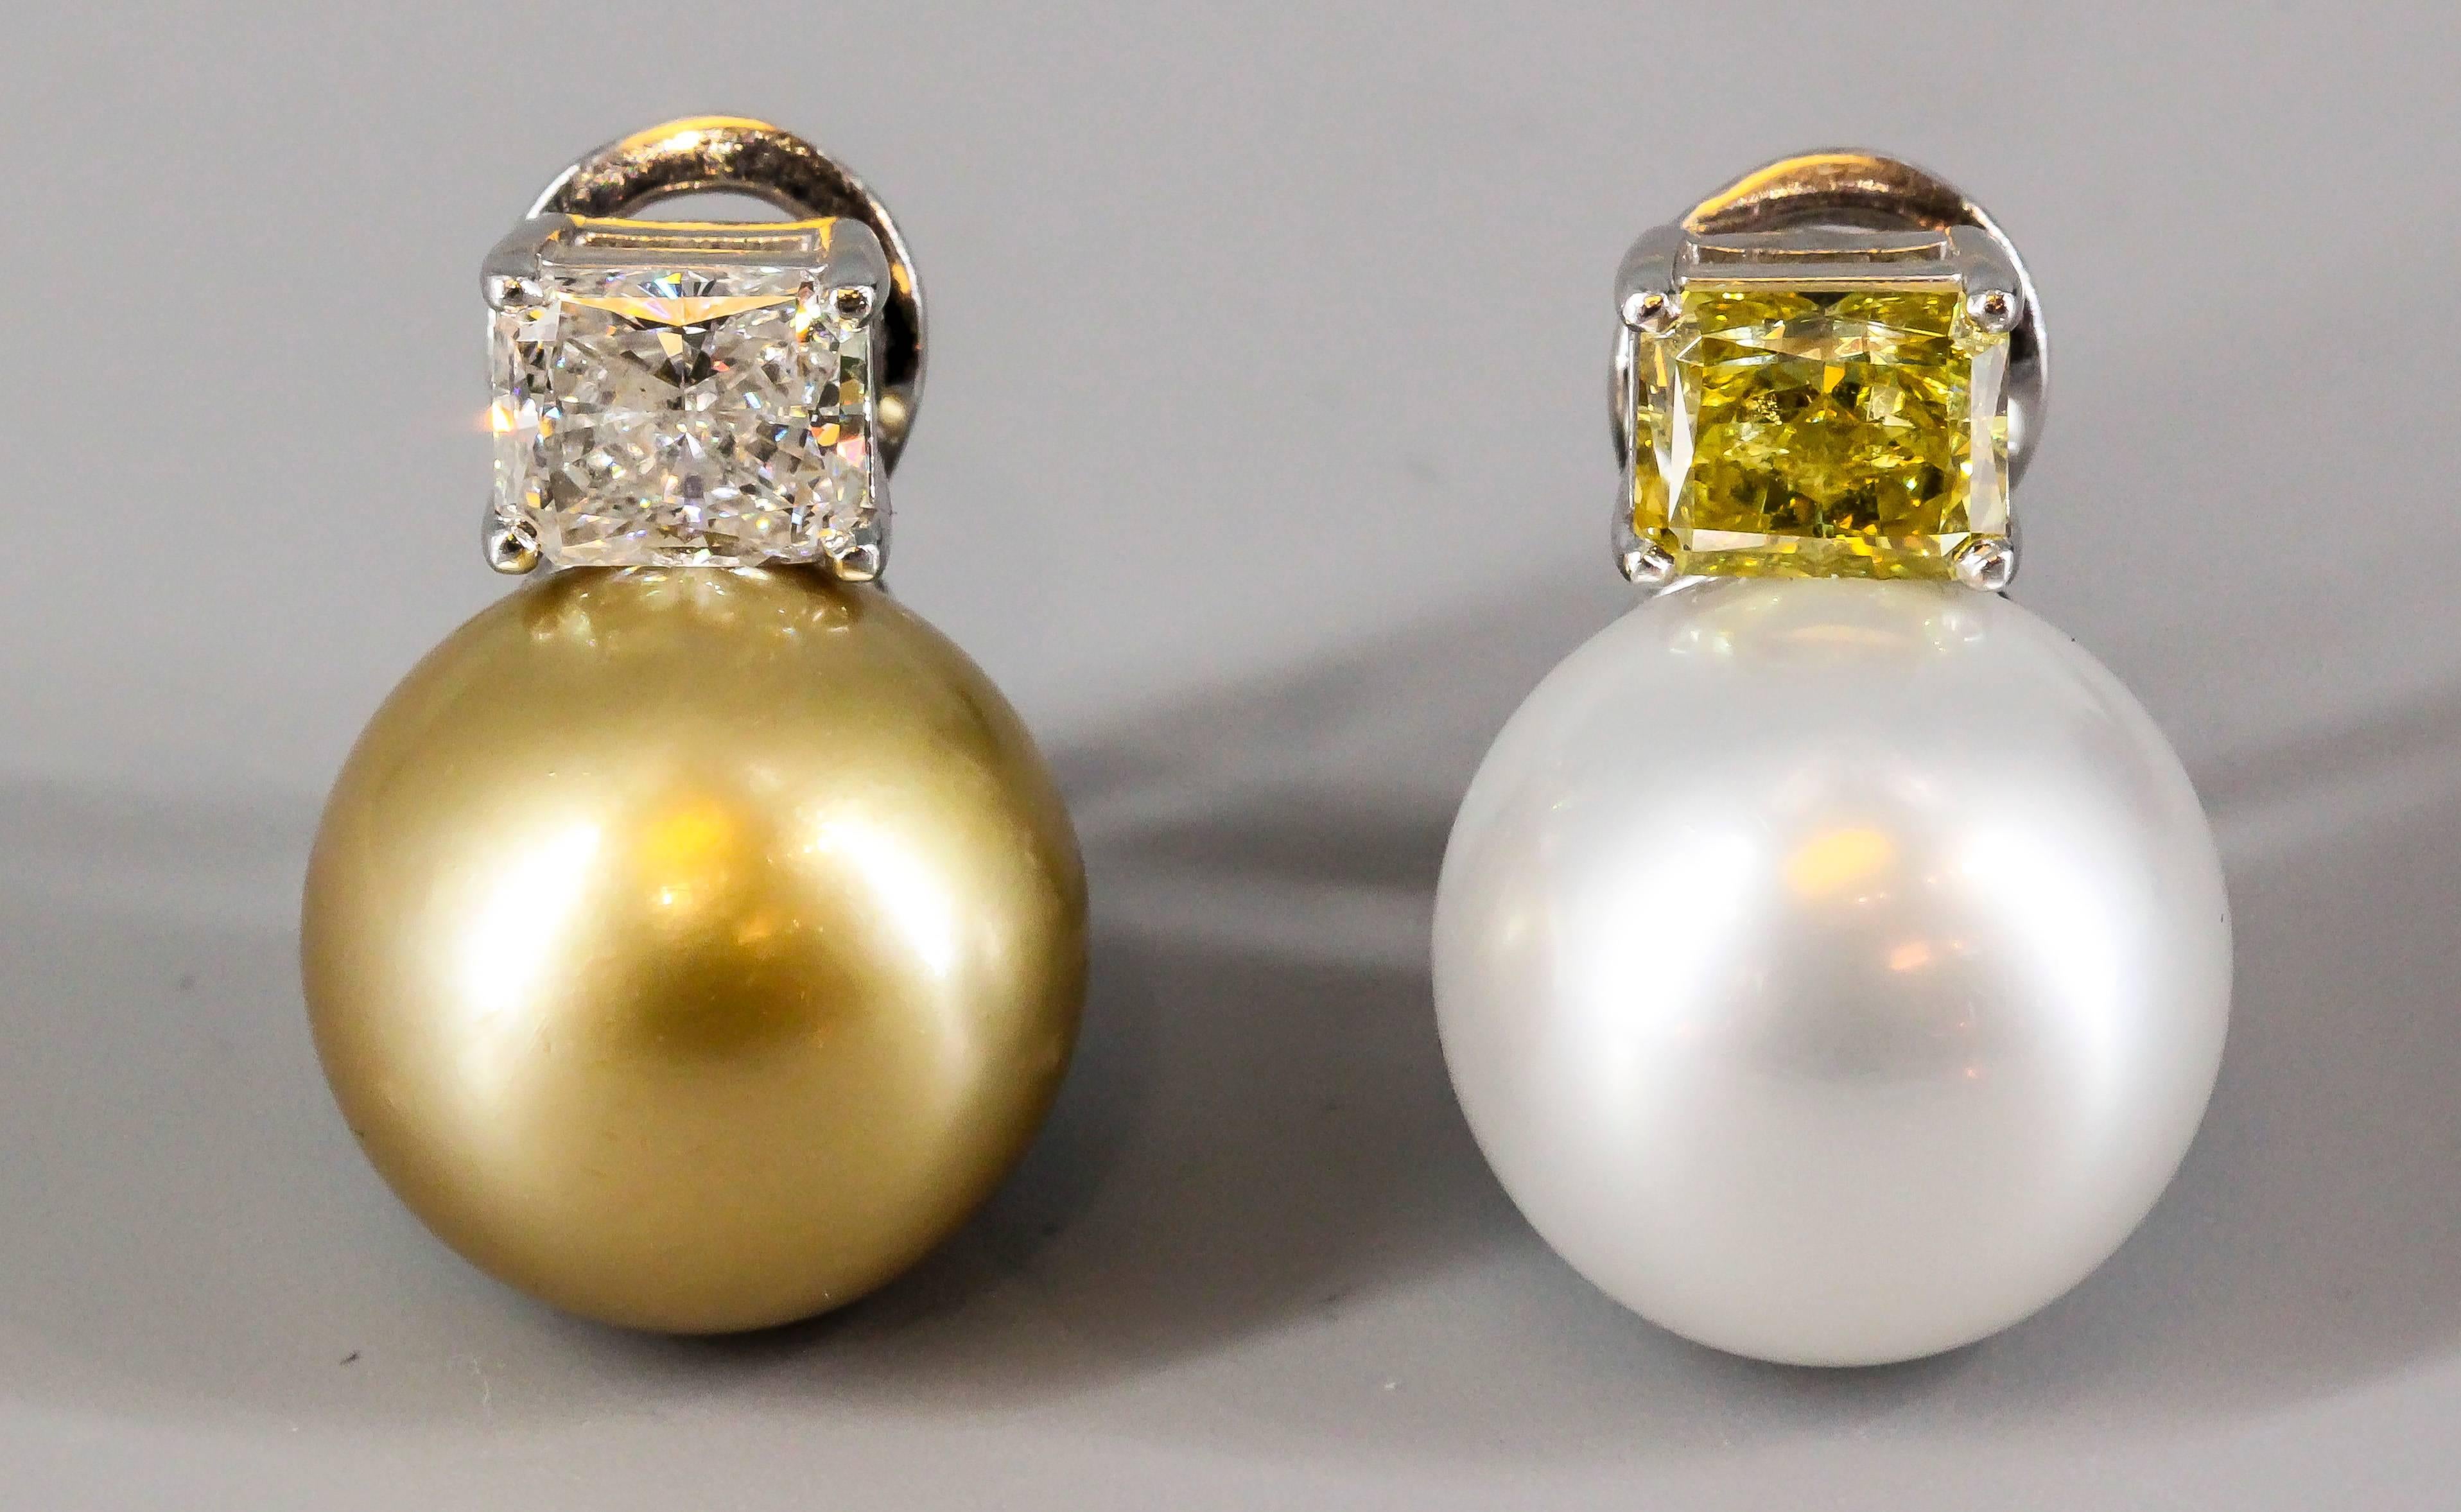 Beautiful diamond, pearl and platinum earrings. They feature rectangular cut very high grade diamonds, one of which is fancy vivid yellow with a total weight of 1.54 cts and VVS2 clarity, while the other is G color, VS1 clarity with a total weight